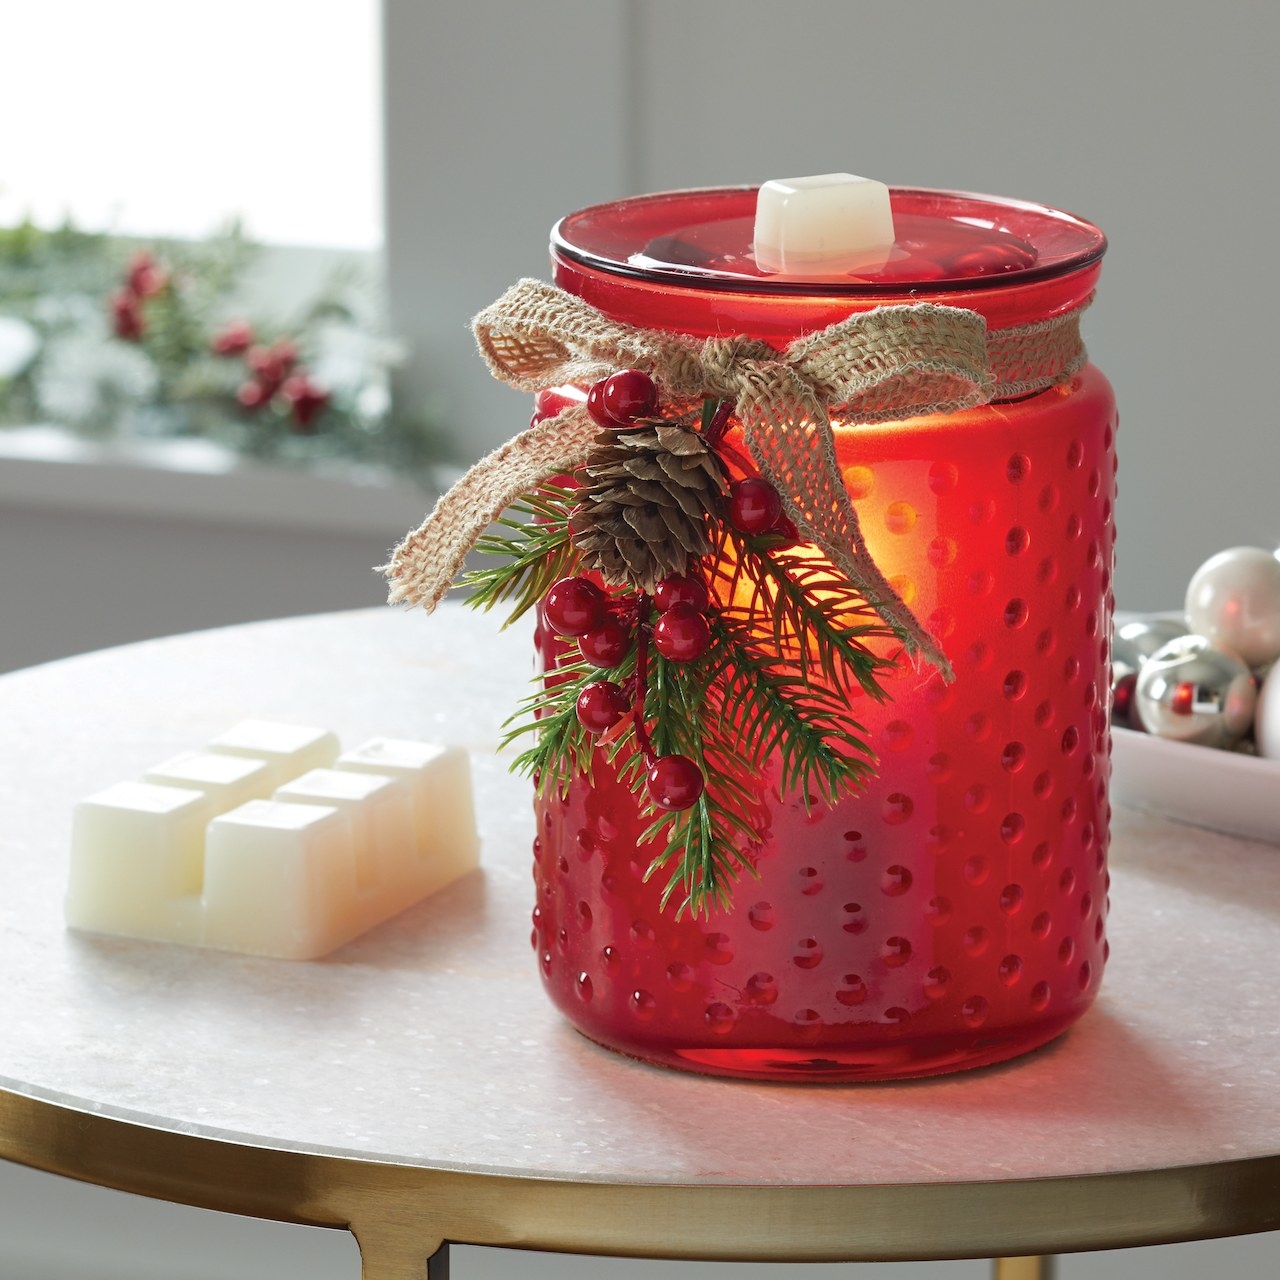 The red wax warmer decorated with a bow that has a small pinecone, red berries and pine needles